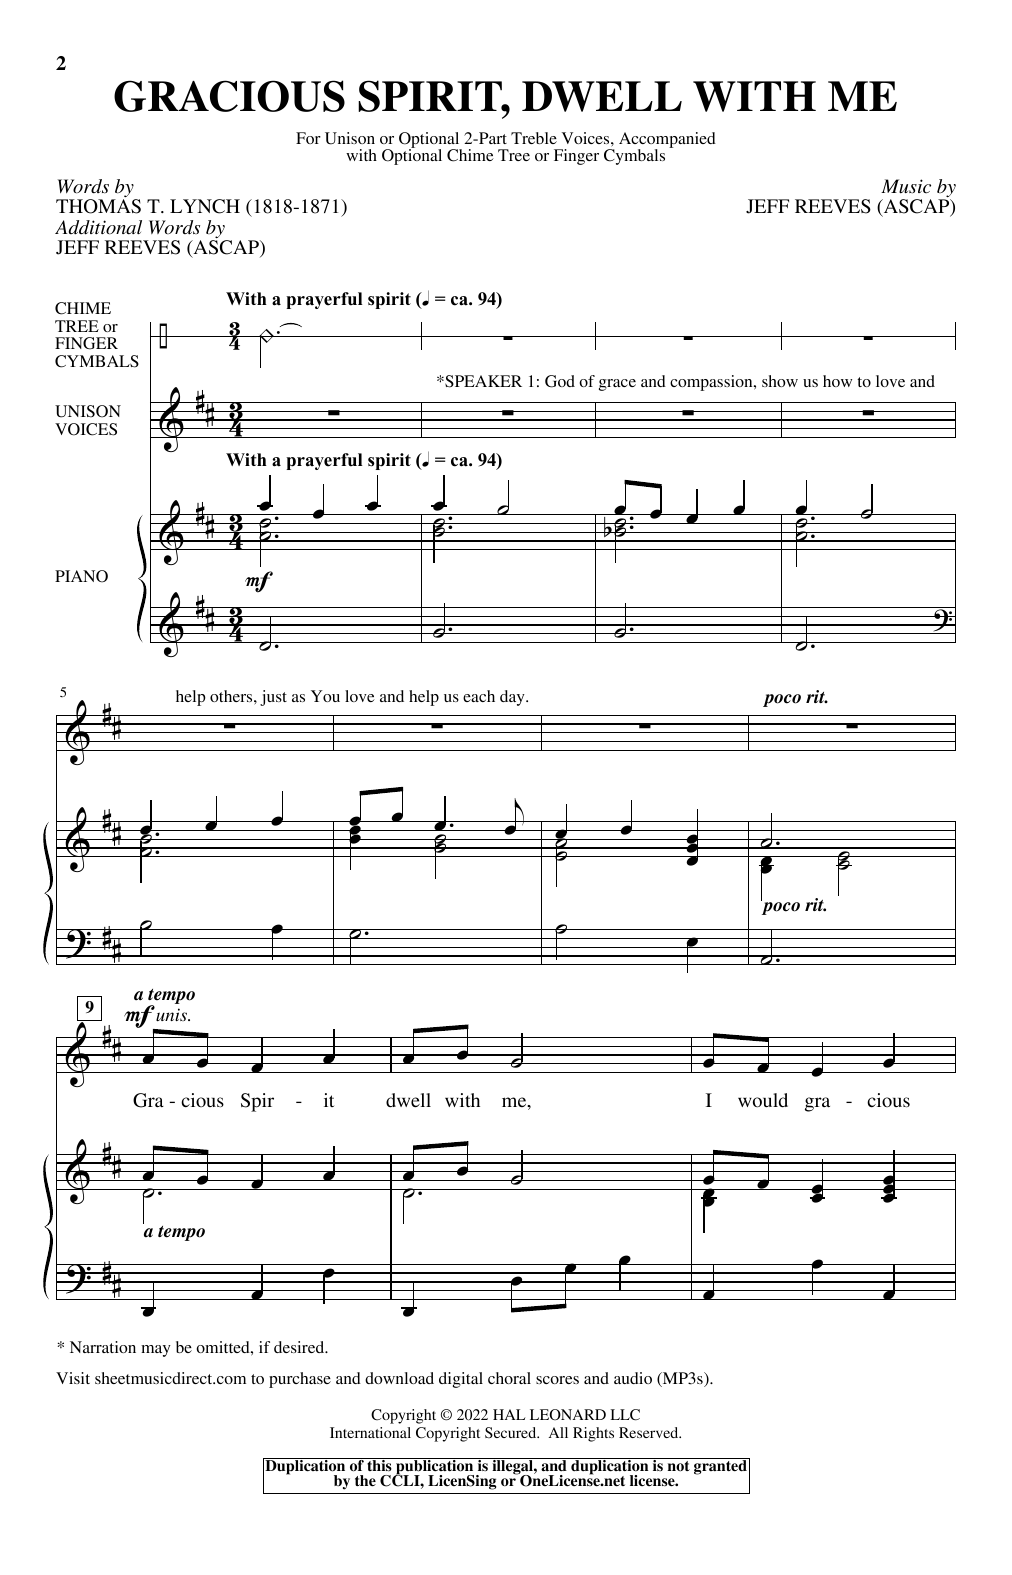 Download Thomas T. Lynch and Jeff Reeves Gracious Spirit, Dwell With Me Sheet Music